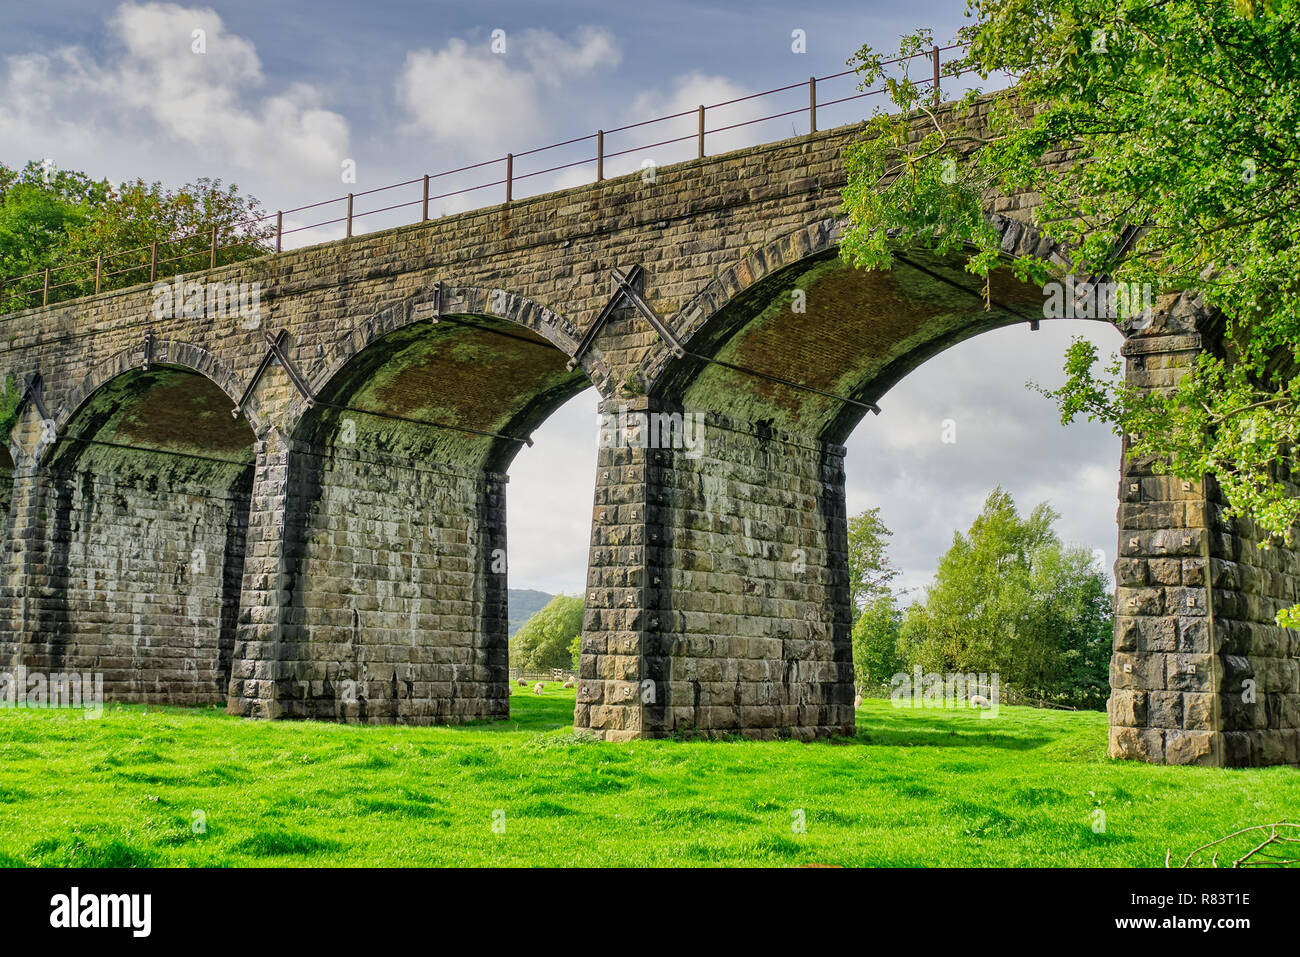 Railway viaduct over the River Keer at Capernwray, Cumbria. Stock Photo